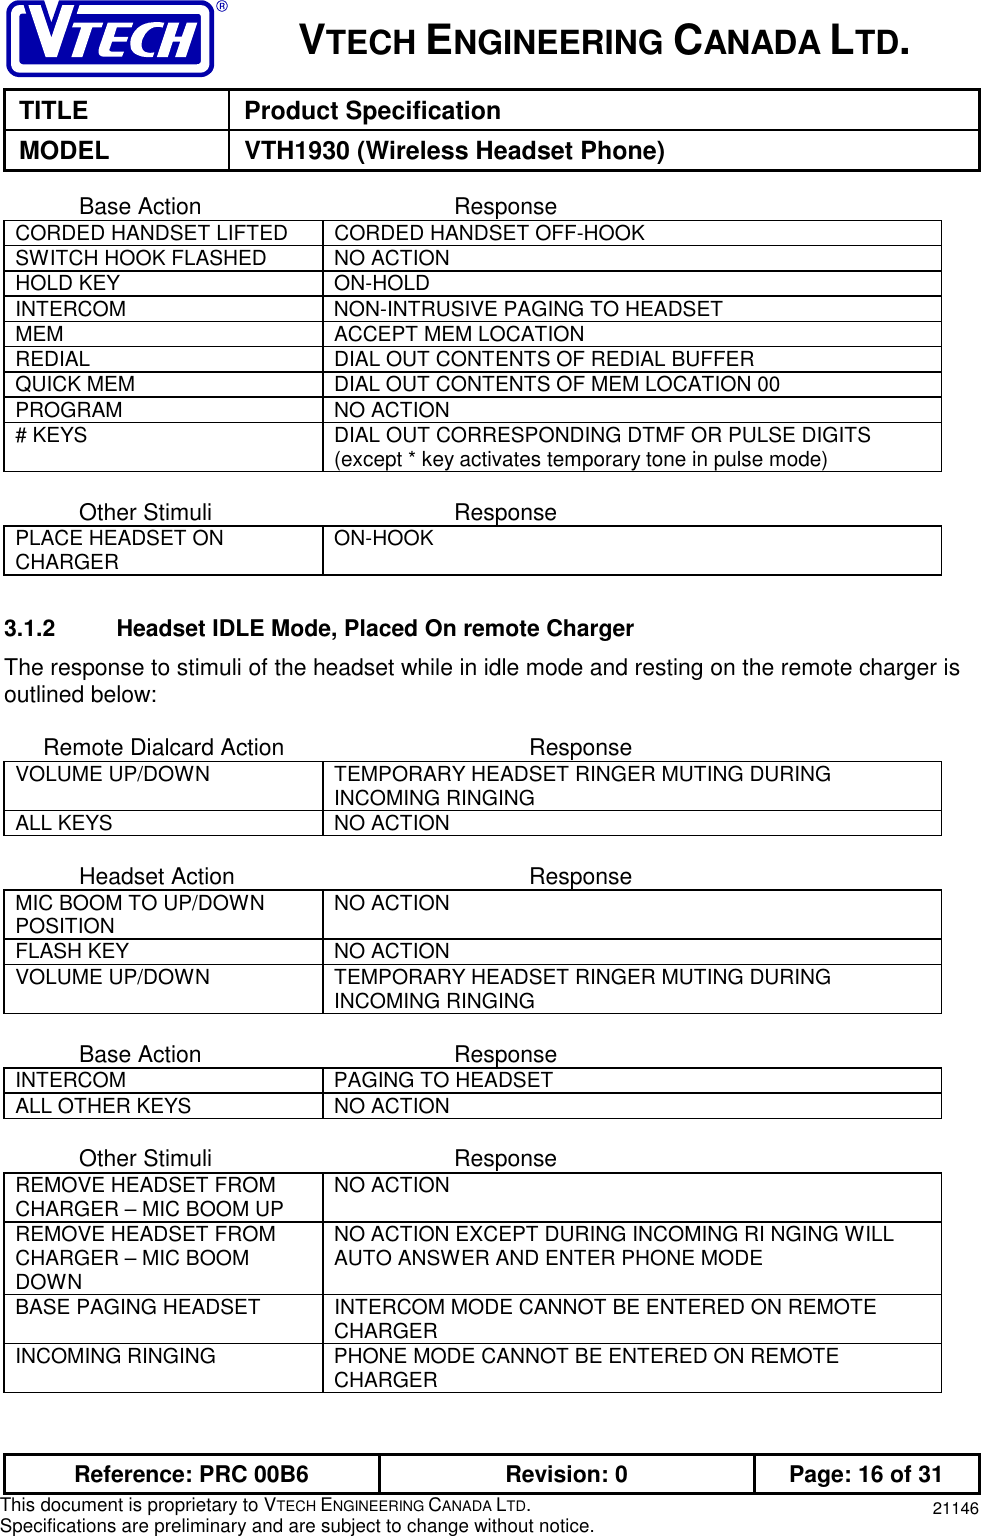 VTECH ENGINEERING CANADA LTD.TITLE Product SpecificationMODEL VTH1930 (Wireless Headset Phone)Reference: PRC 00B6 Revision: 0 Page: 16 of 31This document is proprietary to VTECH ENGINEERING CANADA LTD.Specifications are preliminary and are subject to change without notice. 21146Base Action ResponseCORDED HANDSET LIFTED CORDED HANDSET OFF-HOOKSWITCH HOOK FLASHED NO ACTIONHOLD KEY ON-HOLDINTERCOM NON-INTRUSIVE PAGING TO HEADSETMEM ACCEPT MEM LOCATIONREDIAL DIAL OUT CONTENTS OF REDIAL BUFFERQUICK MEM DIAL OUT CONTENTS OF MEM LOCATION 00PROGRAM NO ACTION# KEYS DIAL OUT CORRESPONDING DTMF OR PULSE DIGITS(except * key activates temporary tone in pulse mode)Other Stimuli ResponsePLACE HEADSET ONCHARGER ON-HOOK3.1.2  Headset IDLE Mode, Placed On remote ChargerThe response to stimuli of the headset while in idle mode and resting on the remote charger isoutlined below:      Remote Dialcard Action ResponseVOLUME UP/DOWN TEMPORARY HEADSET RINGER MUTING DURINGINCOMING RINGINGALL KEYS NO ACTIONHeadset Action ResponseMIC BOOM TO UP/DOWNPOSITION NO ACTIONFLASH KEY NO ACTIONVOLUME UP/DOWN TEMPORARY HEADSET RINGER MUTING DURINGINCOMING RINGINGBase Action ResponseINTERCOM PAGING TO HEADSETALL OTHER KEYS NO ACTIONOther Stimuli ResponseREMOVE HEADSET FROMCHARGER – MIC BOOM UP NO ACTIONREMOVE HEADSET FROMCHARGER – MIC BOOMDOWNNO ACTION EXCEPT DURING INCOMING RI NGING WILLAUTO ANSWER AND ENTER PHONE MODEBASE PAGING HEADSET INTERCOM MODE CANNOT BE ENTERED ON REMOTECHARGERINCOMING RINGING PHONE MODE CANNOT BE ENTERED ON REMOTECHARGER